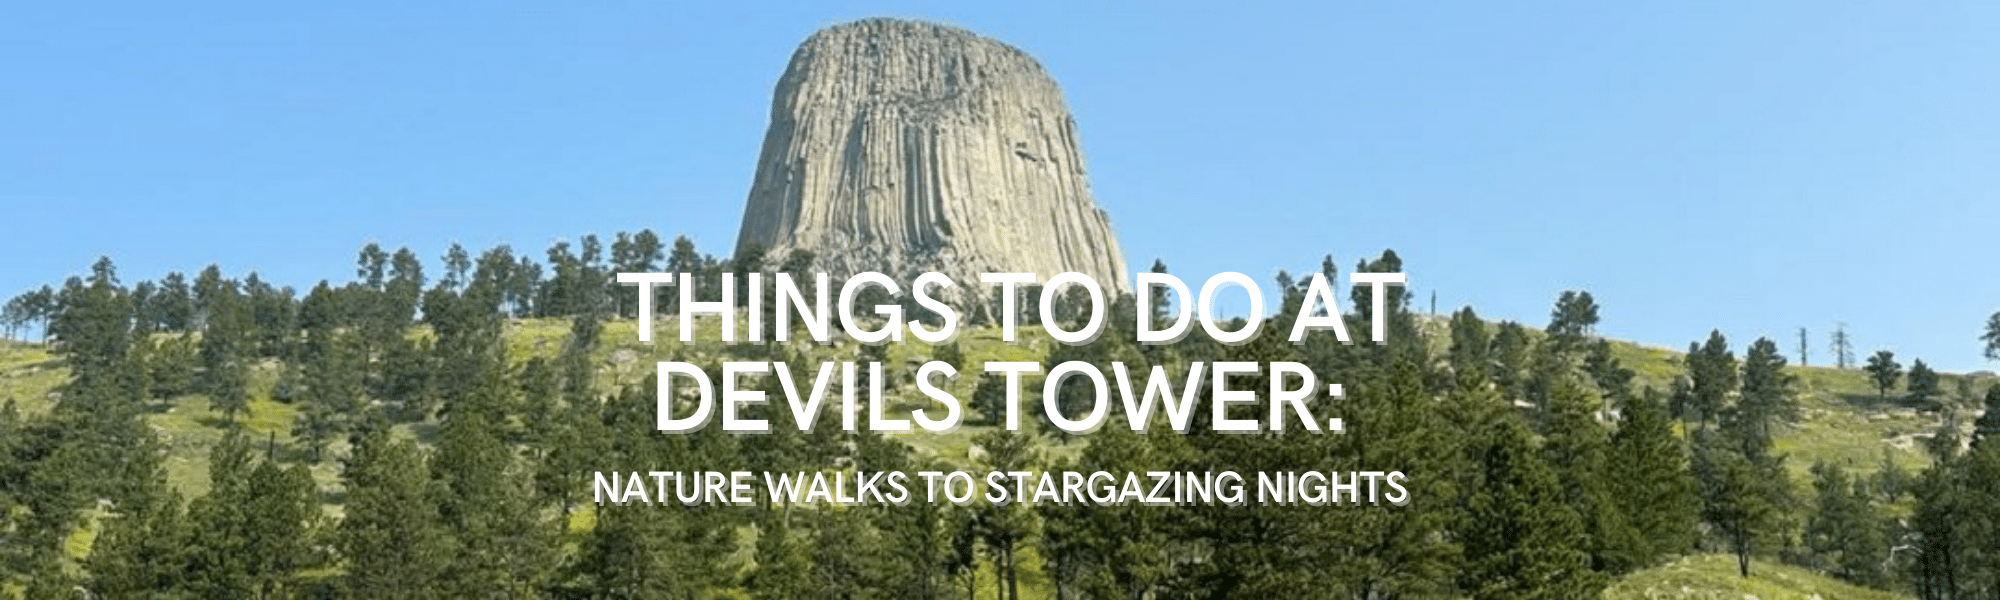 Things to do at Devils Tower